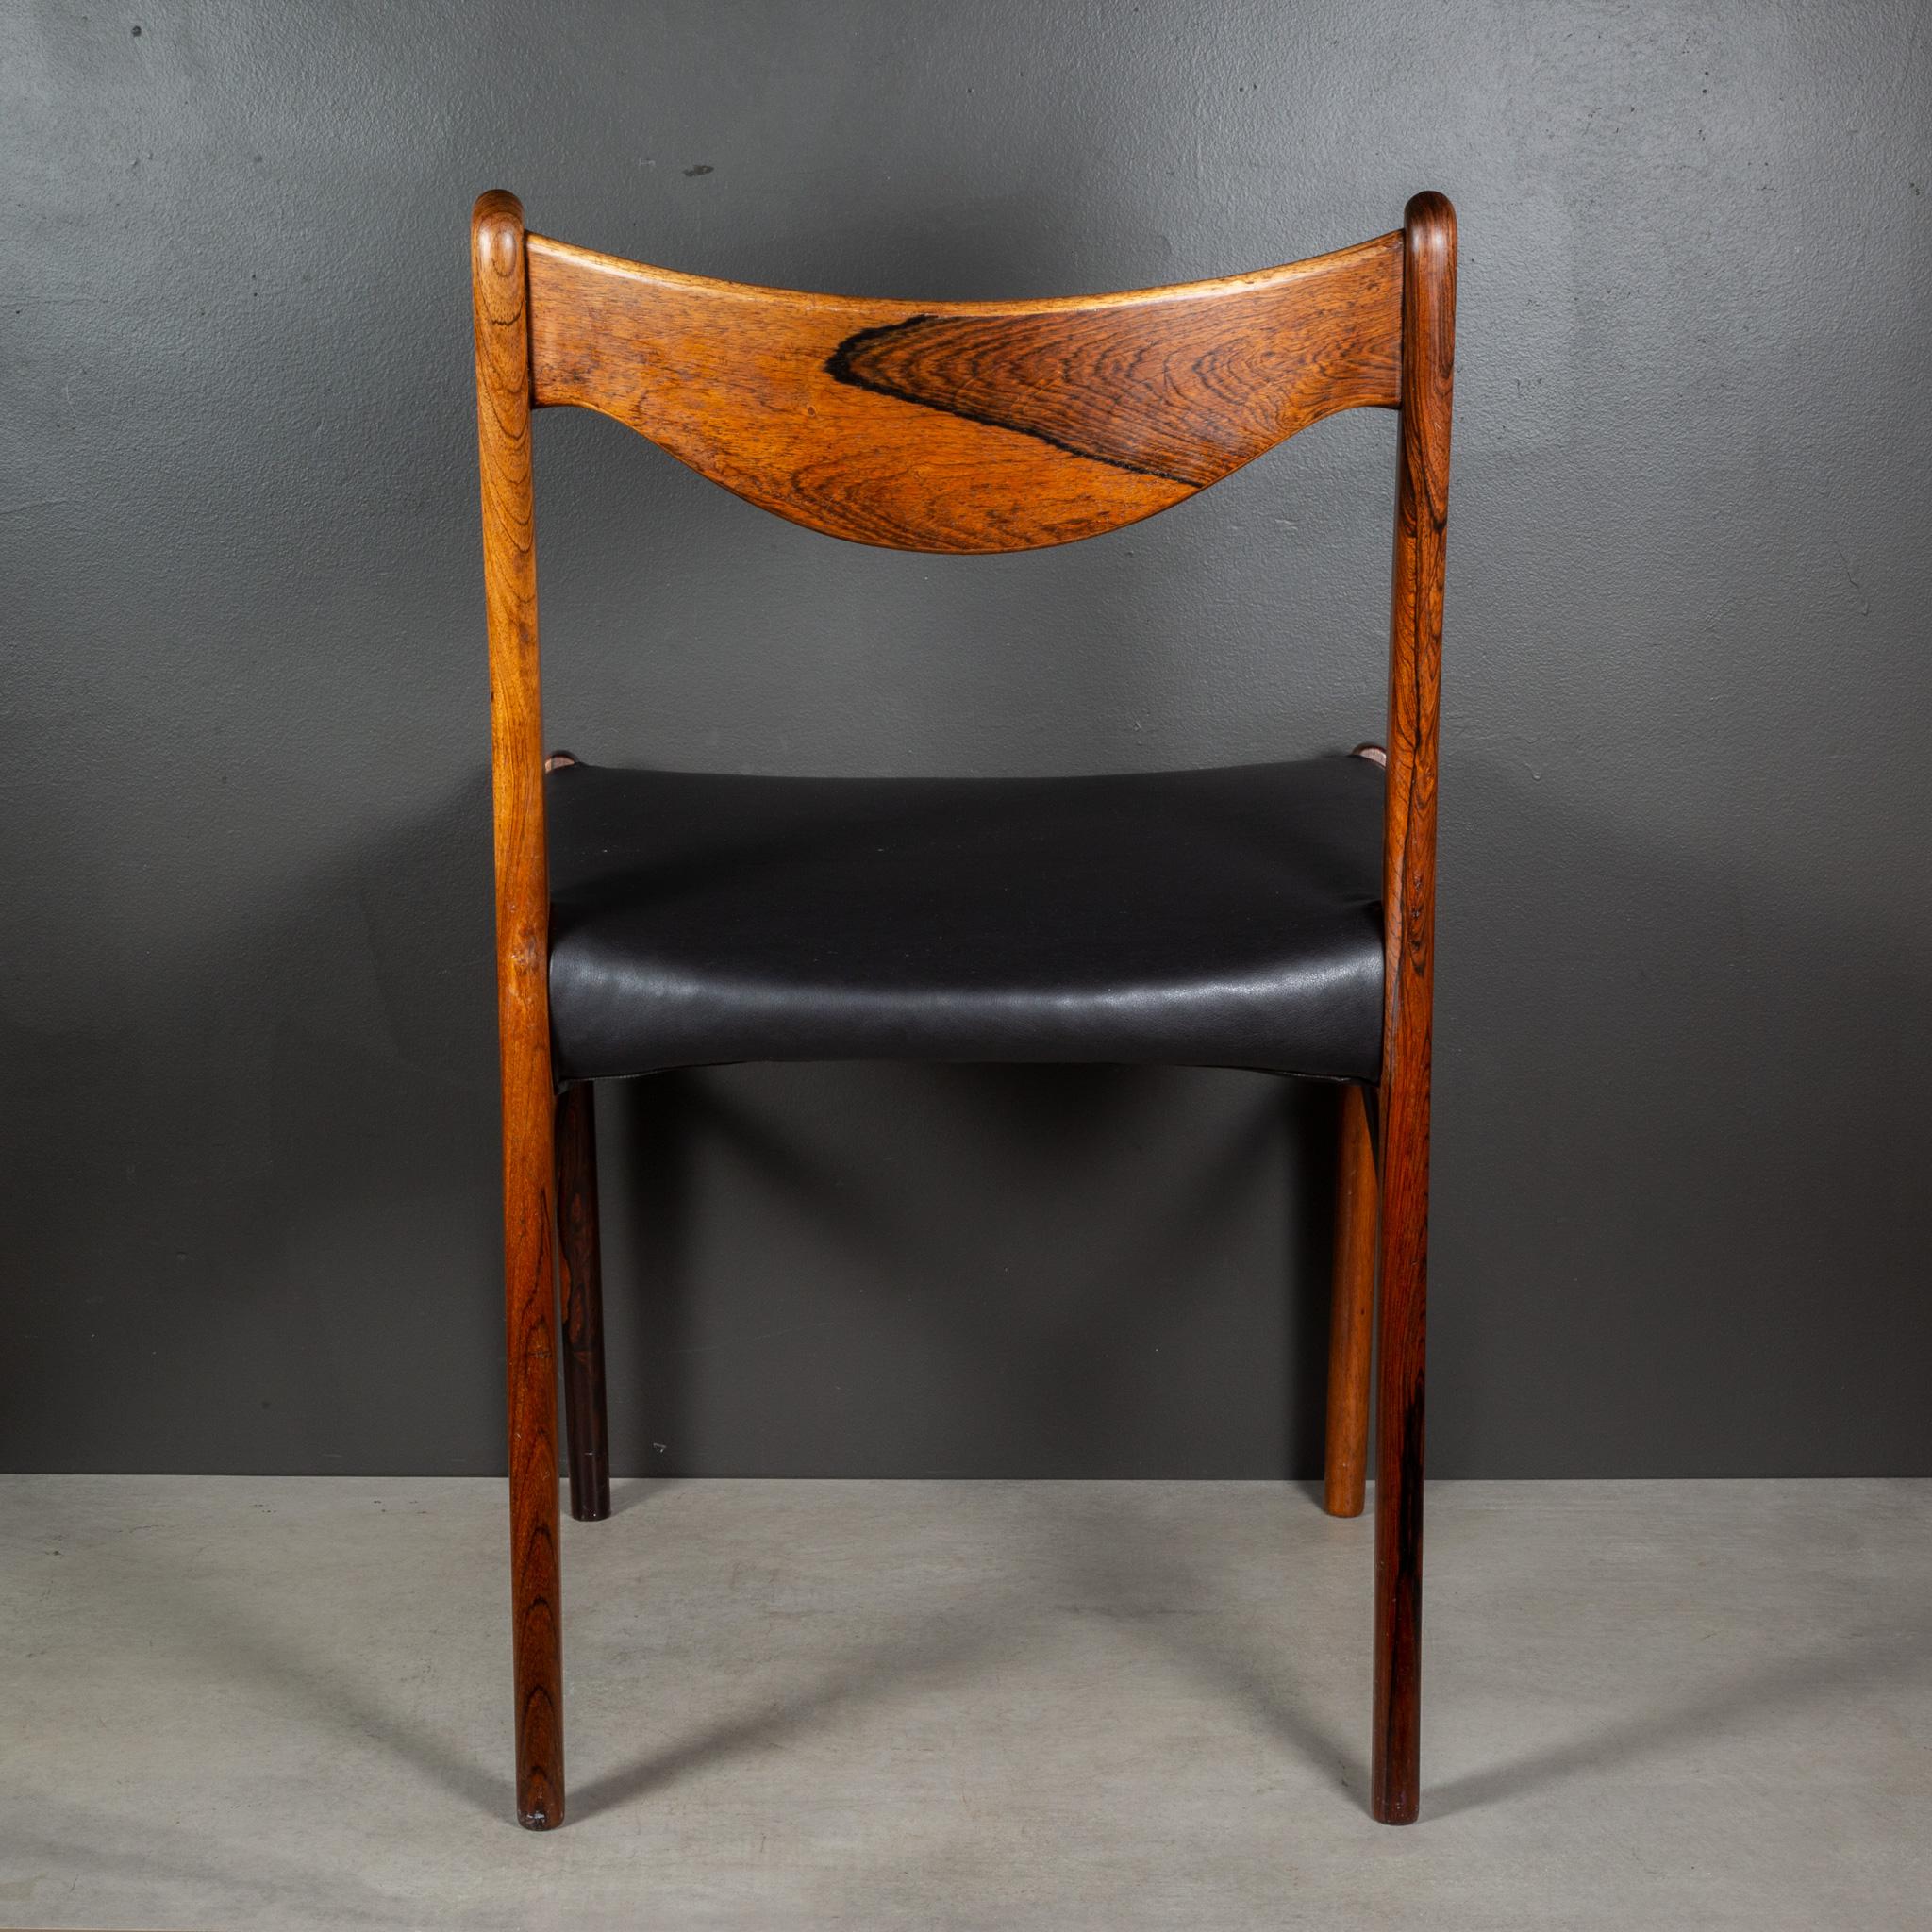 Arne Wahl Iversen Model GS61 Rosewood and Leather Dining Chairs c.1950 In Good Condition For Sale In San Francisco, CA